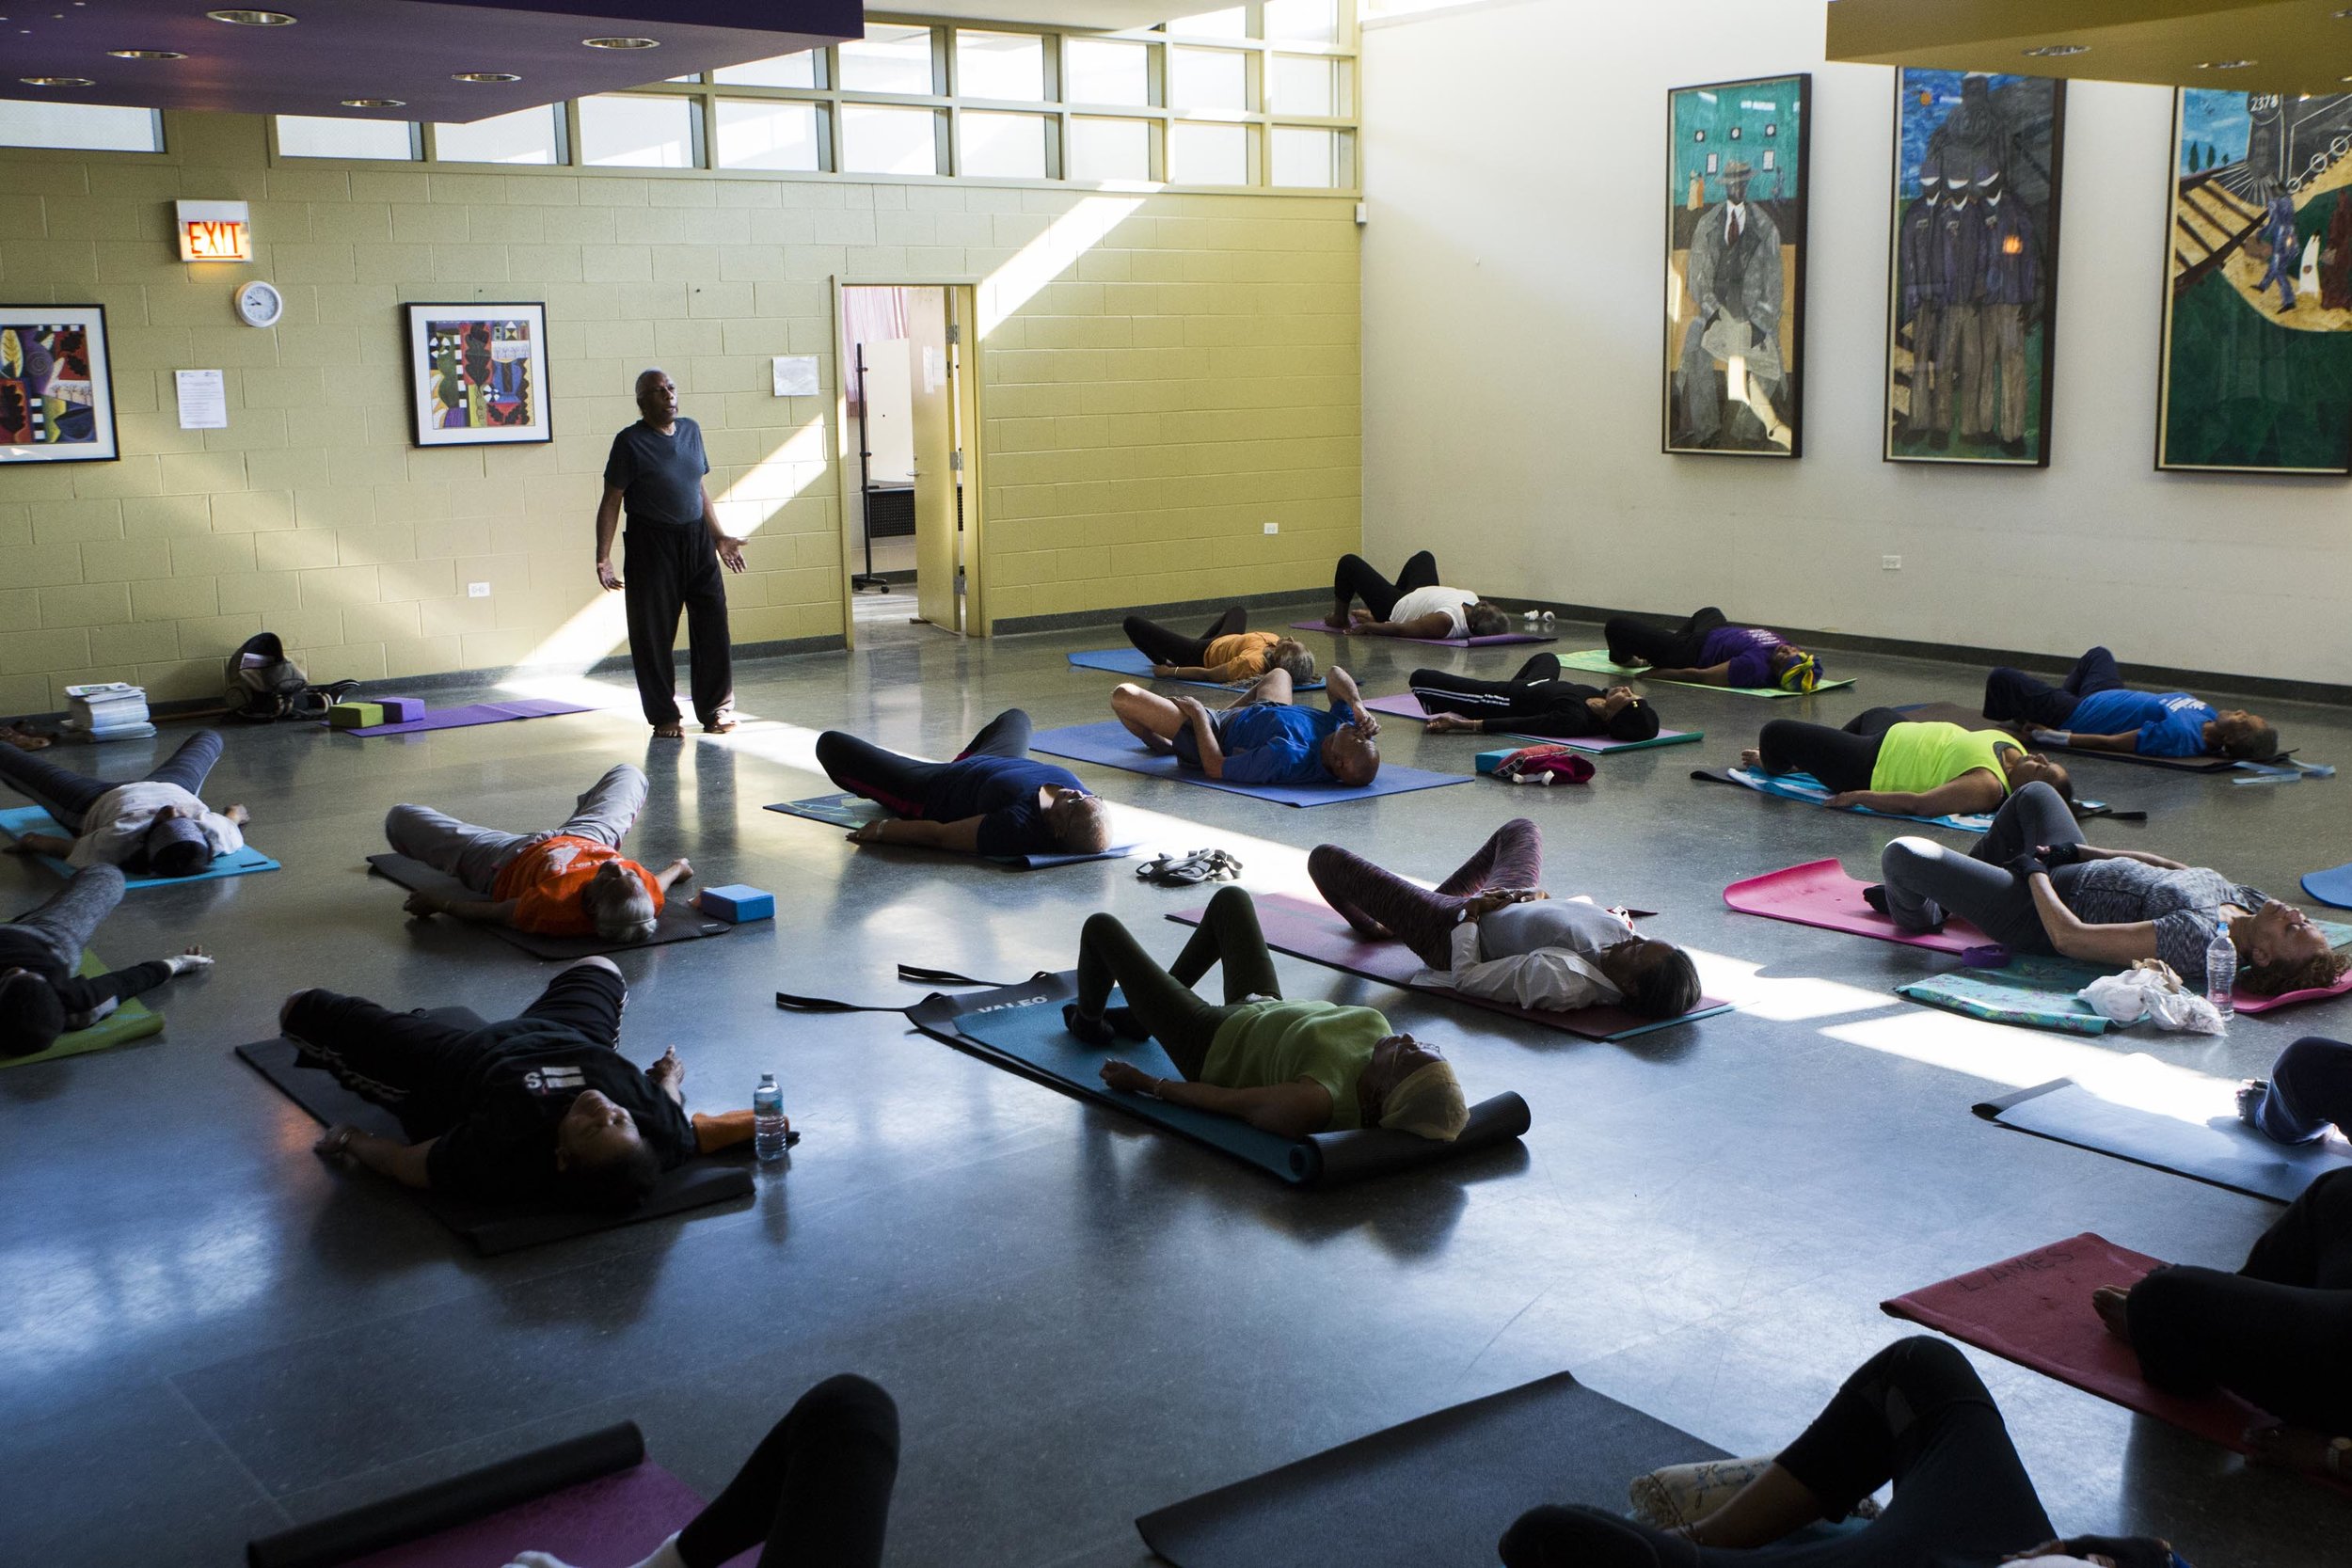  Yoga teacher Tony Stevens, who lives in Calumet Heights, used to serve as a caregiver for several people in his family who were sick. Now, he is committed to living a healthy lifestyle. 